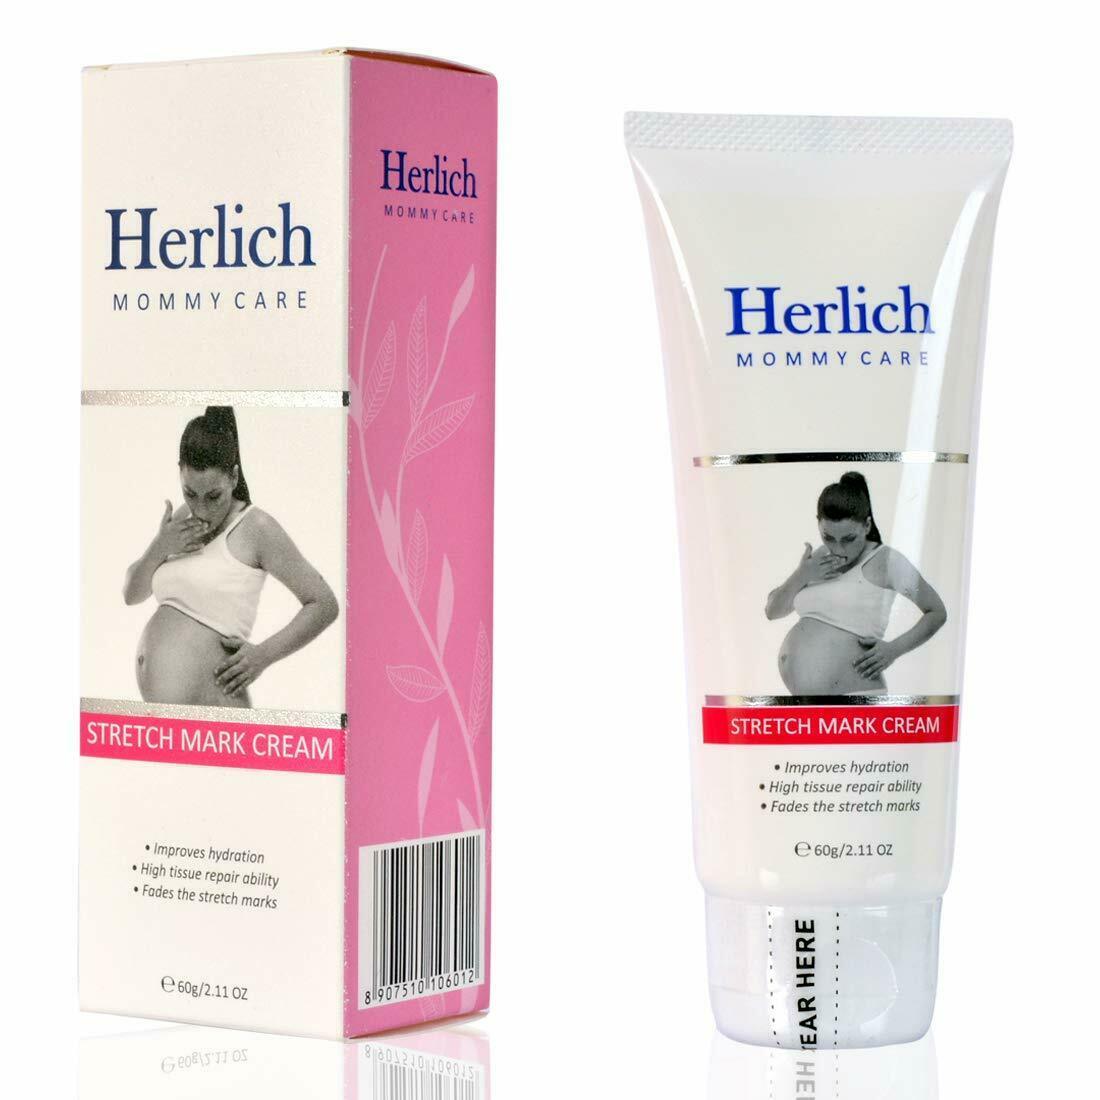 Herlich Stretch Mark Cream for Pregnancy to Reduce Stretch Marks/Scars EXP-03/22